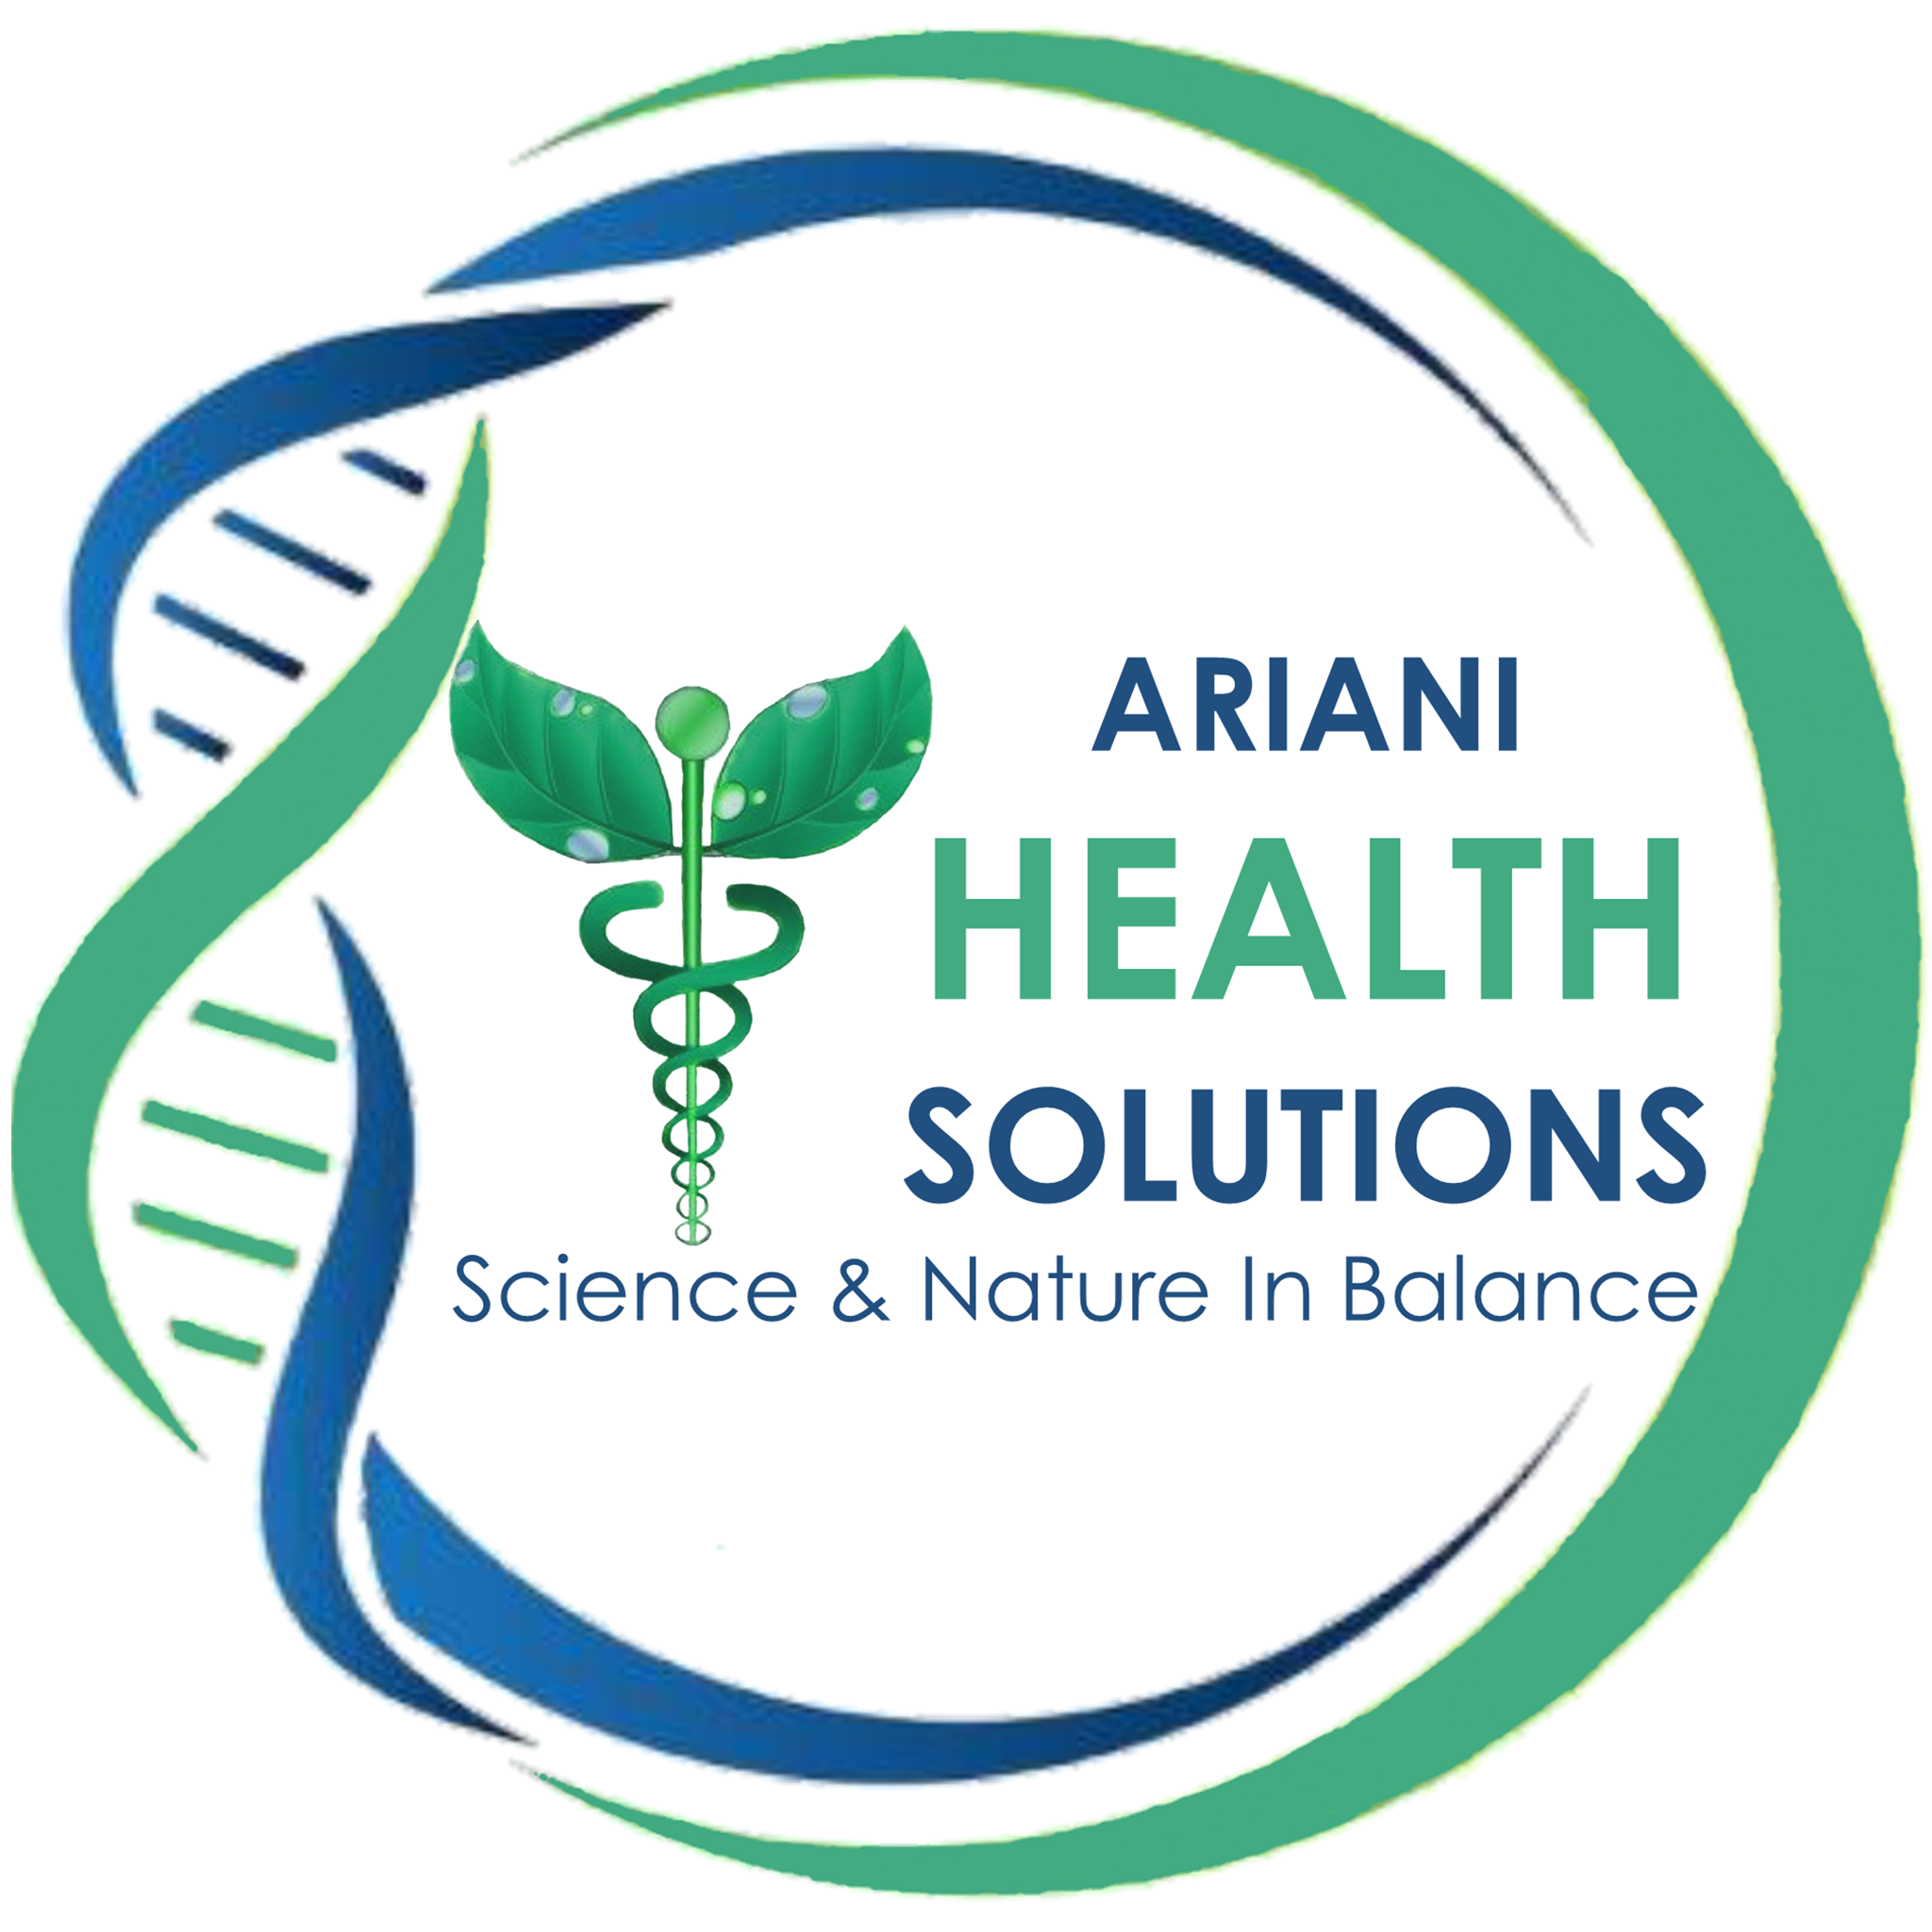 Ariani Health Solutions